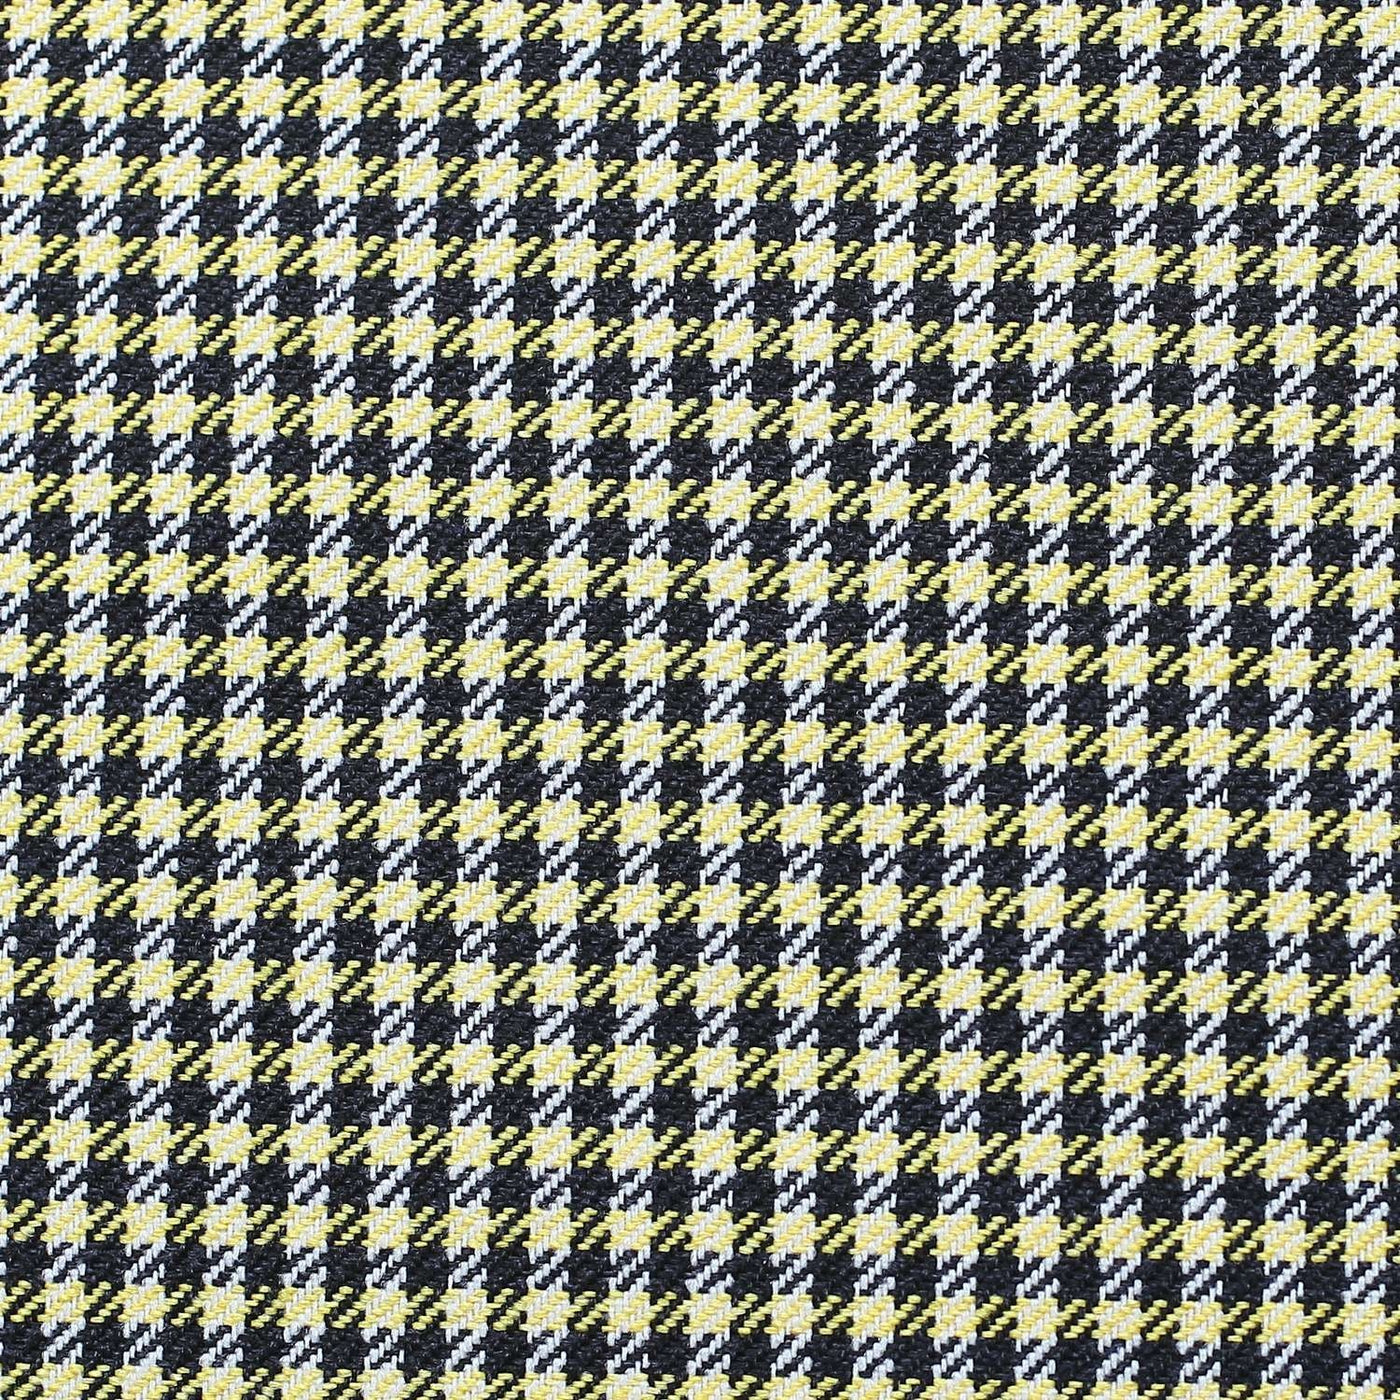 Set of Two 12’ X 20’ Yellow and Black Houndstooth Polyester Zippered Pillow Cover - Accent Throw Pillows